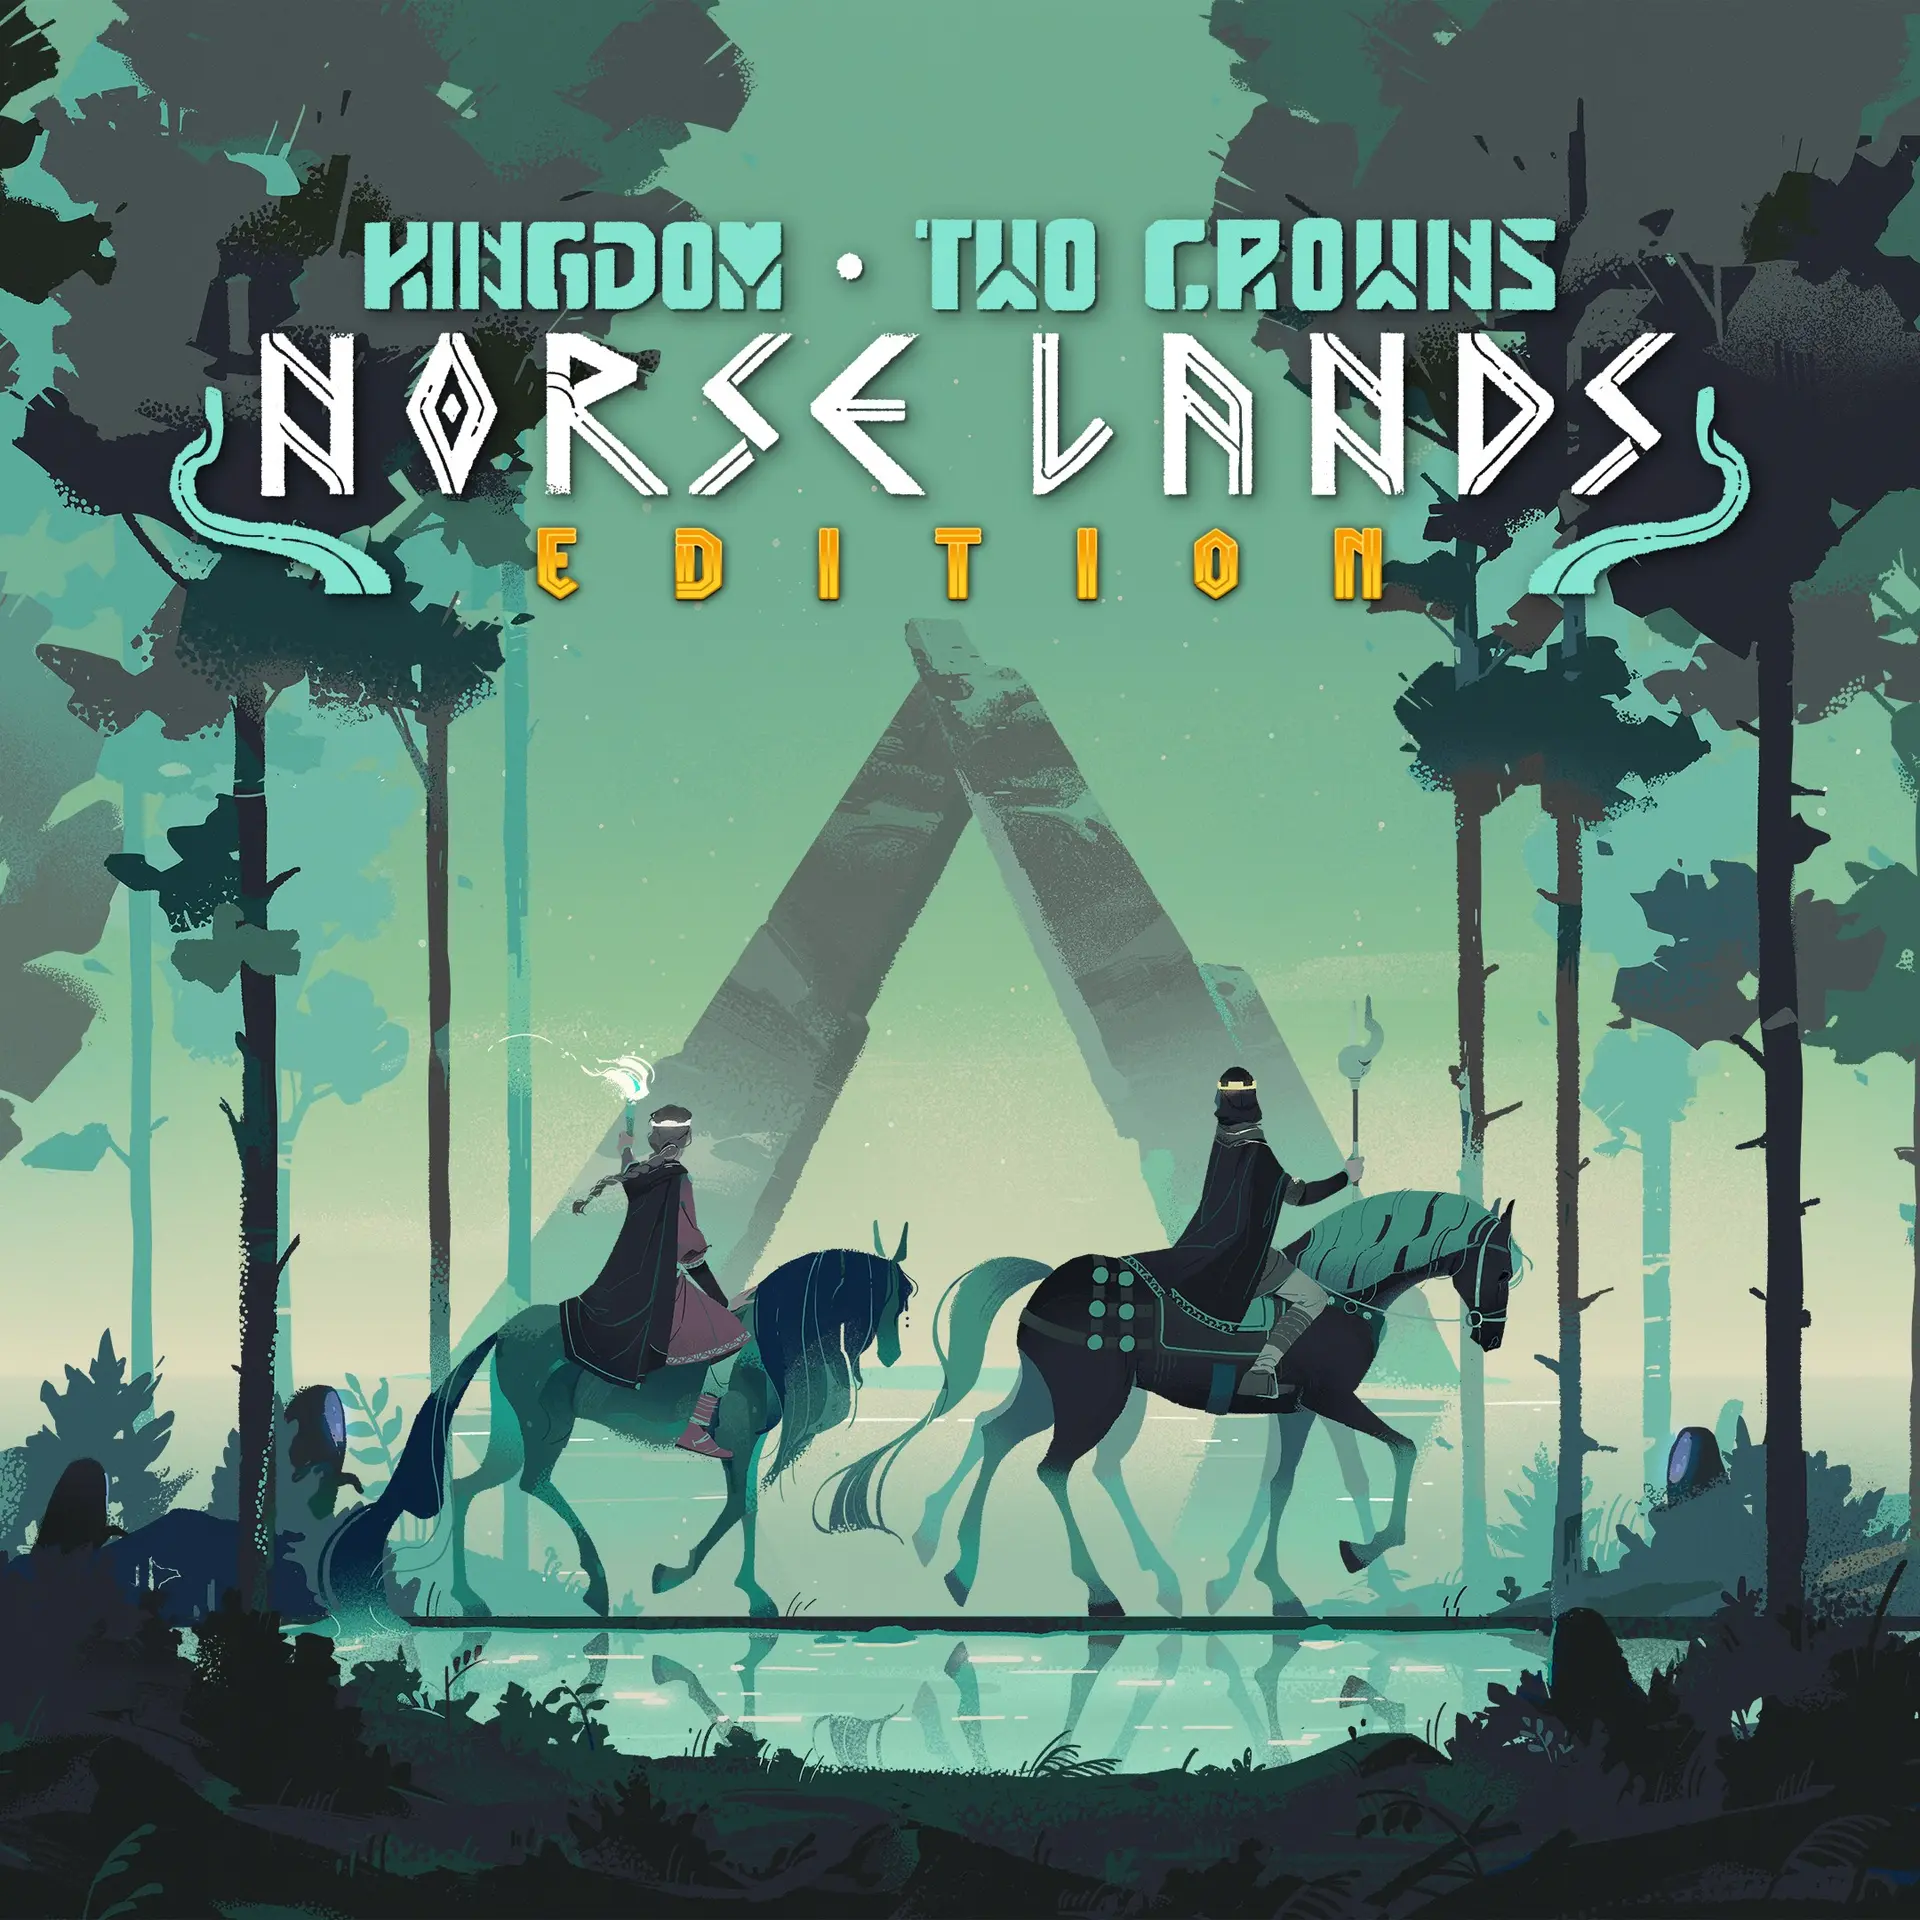 Kingdom Two Crowns: Norse Lands Edition (Xbox Games BR)